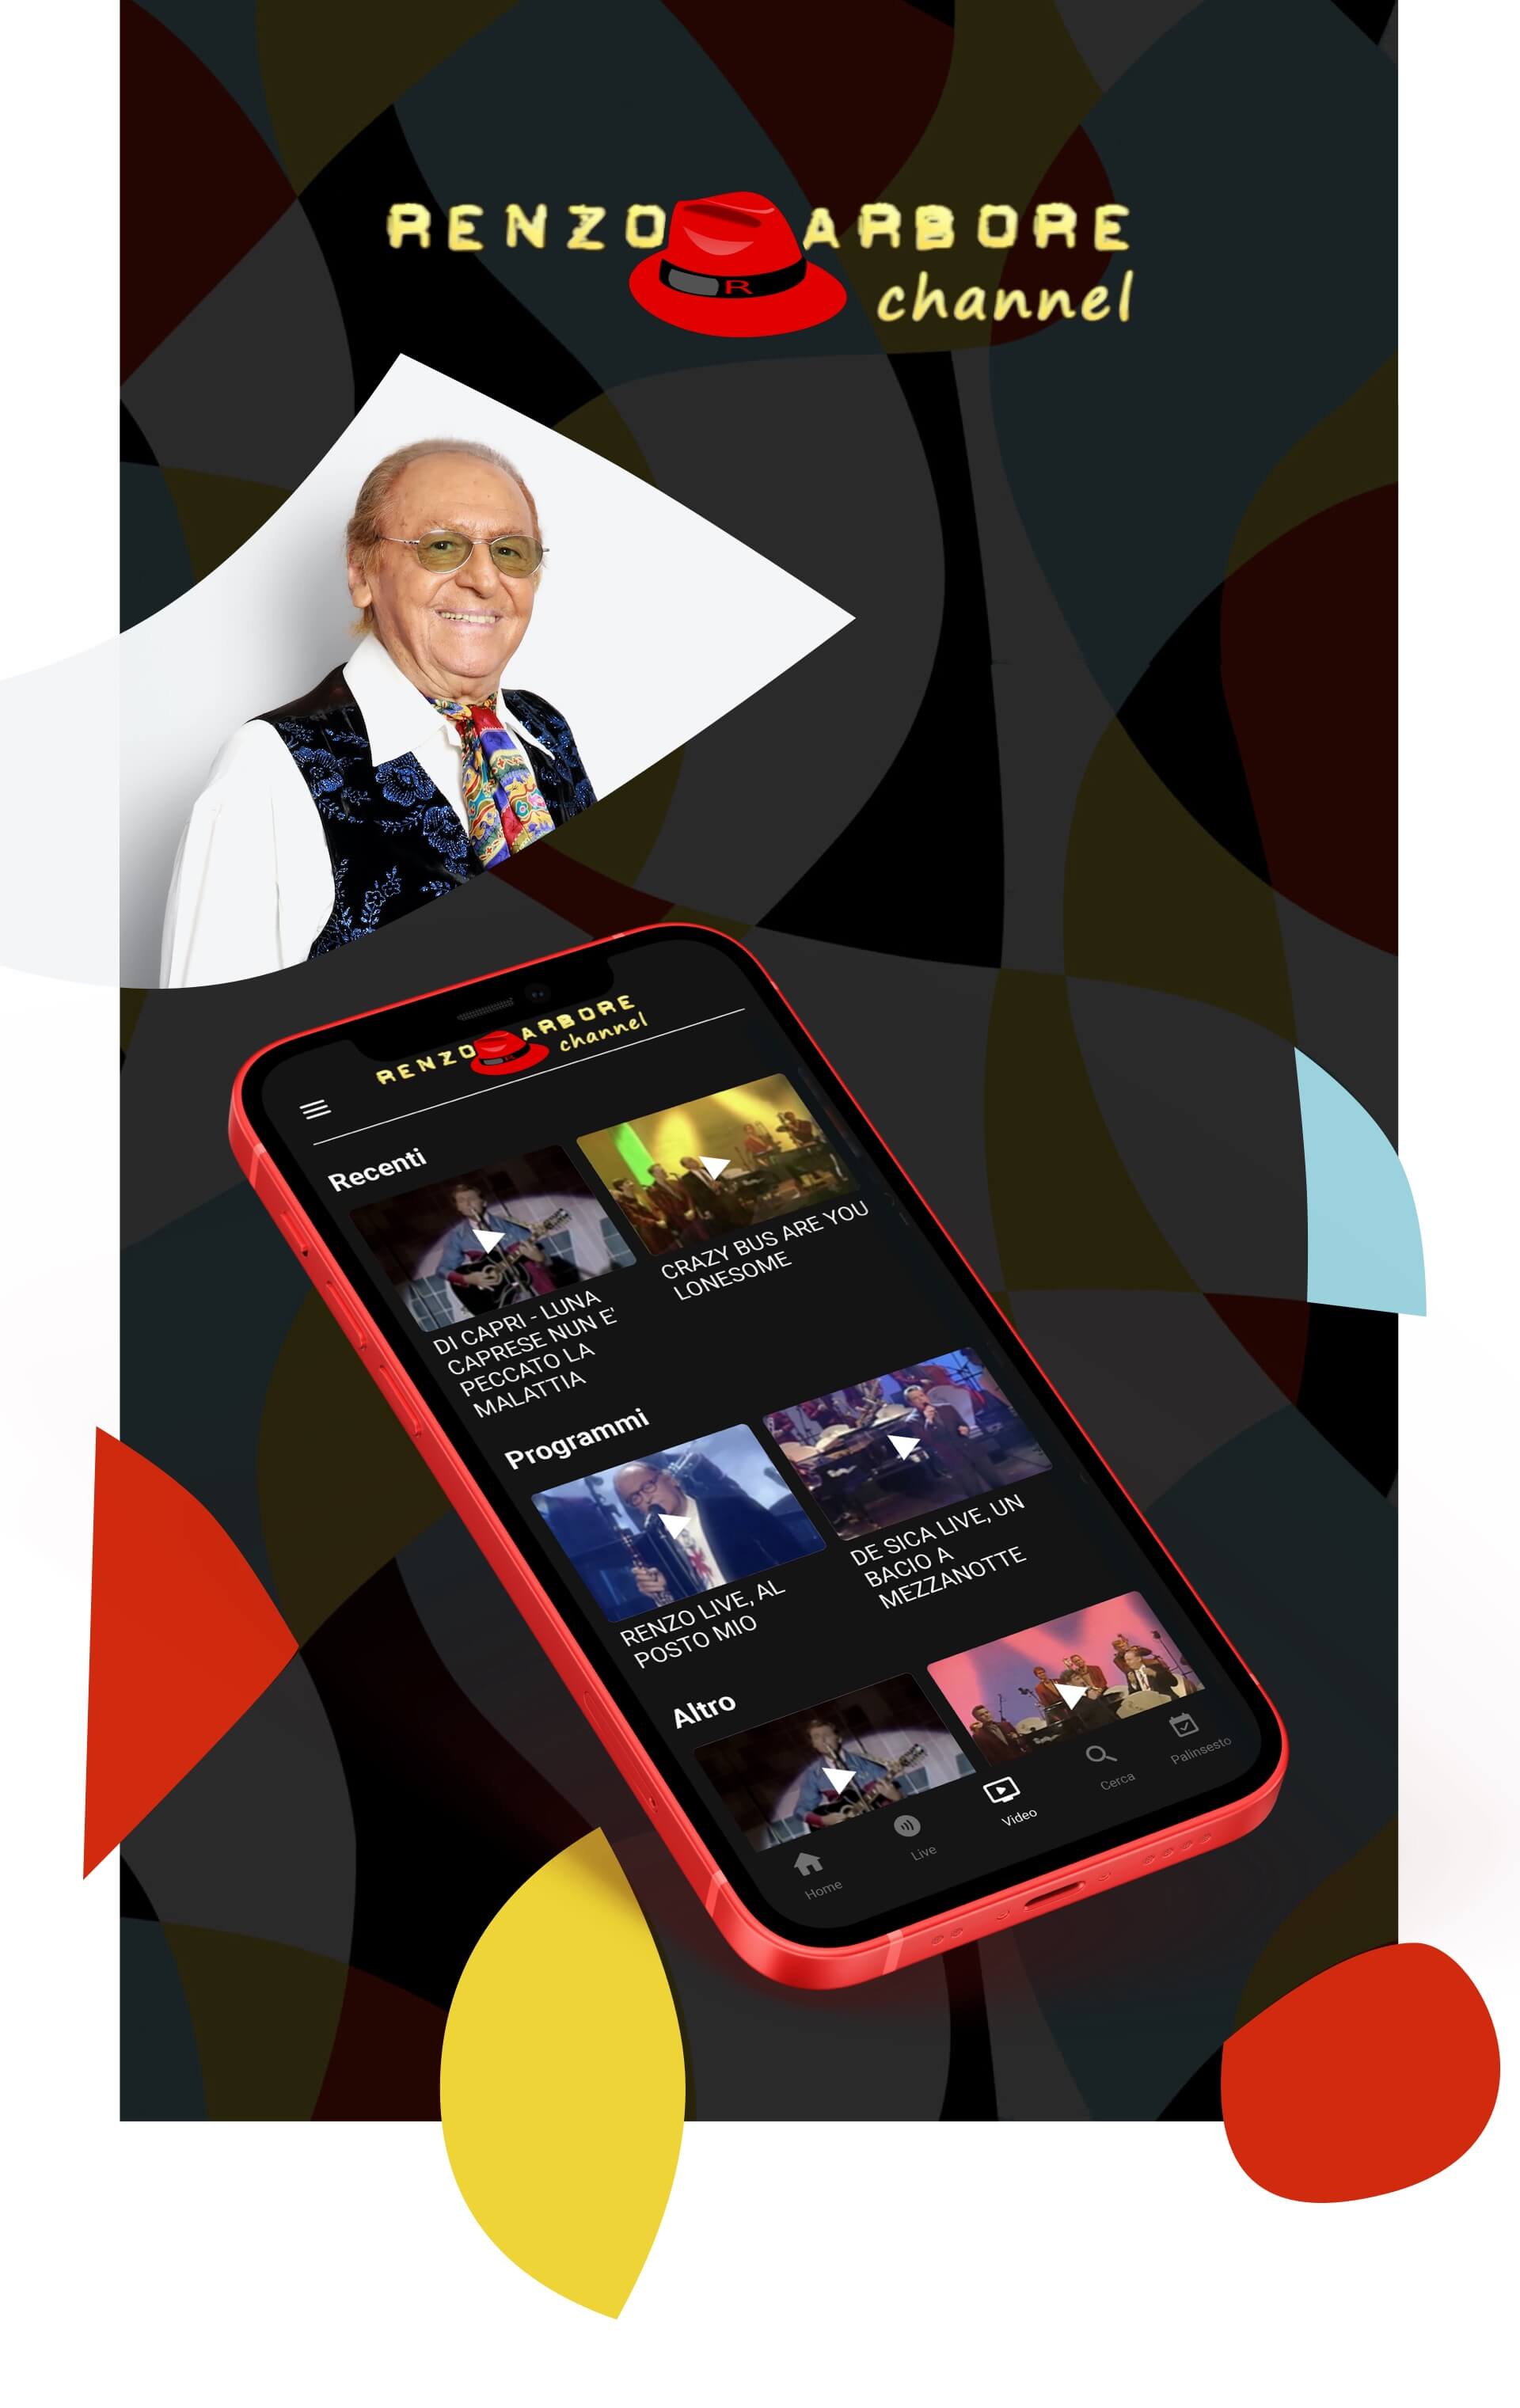 Renzo Arbore Channel, the new mobile video streaming app - 01